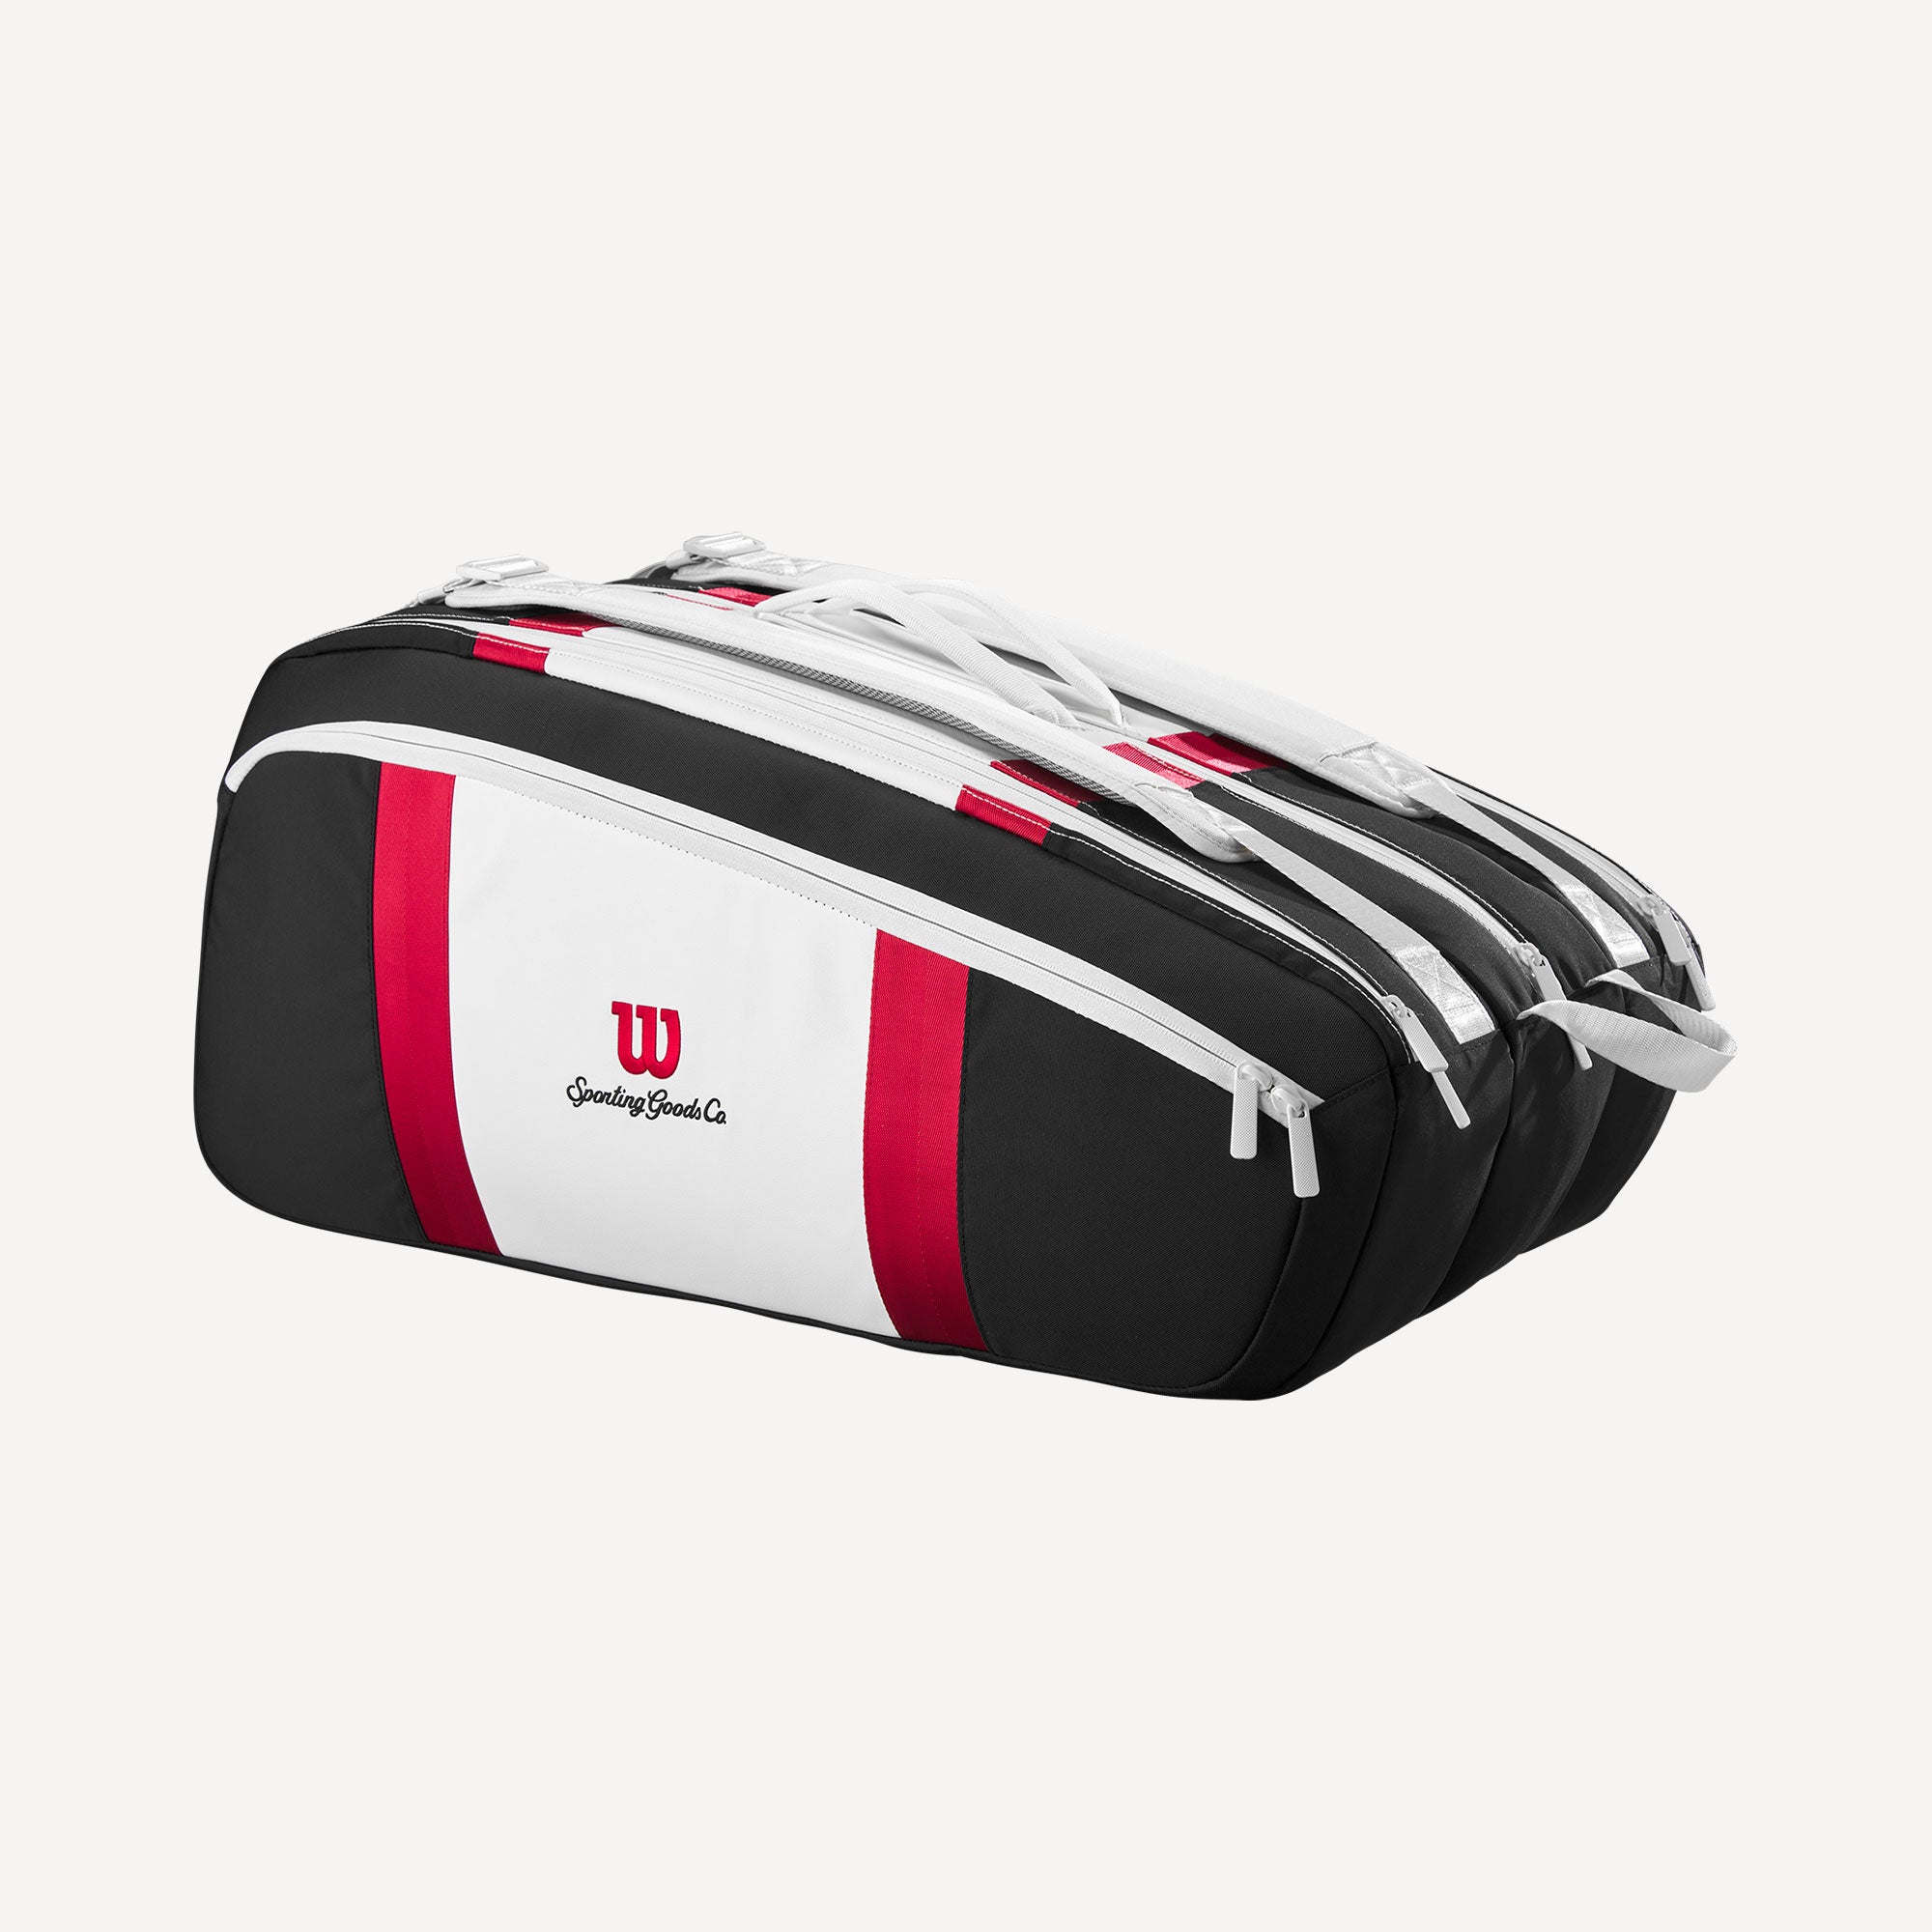 Wilson Courage Collection 15 Racket Tennis Bag - Black/White/Red (1)